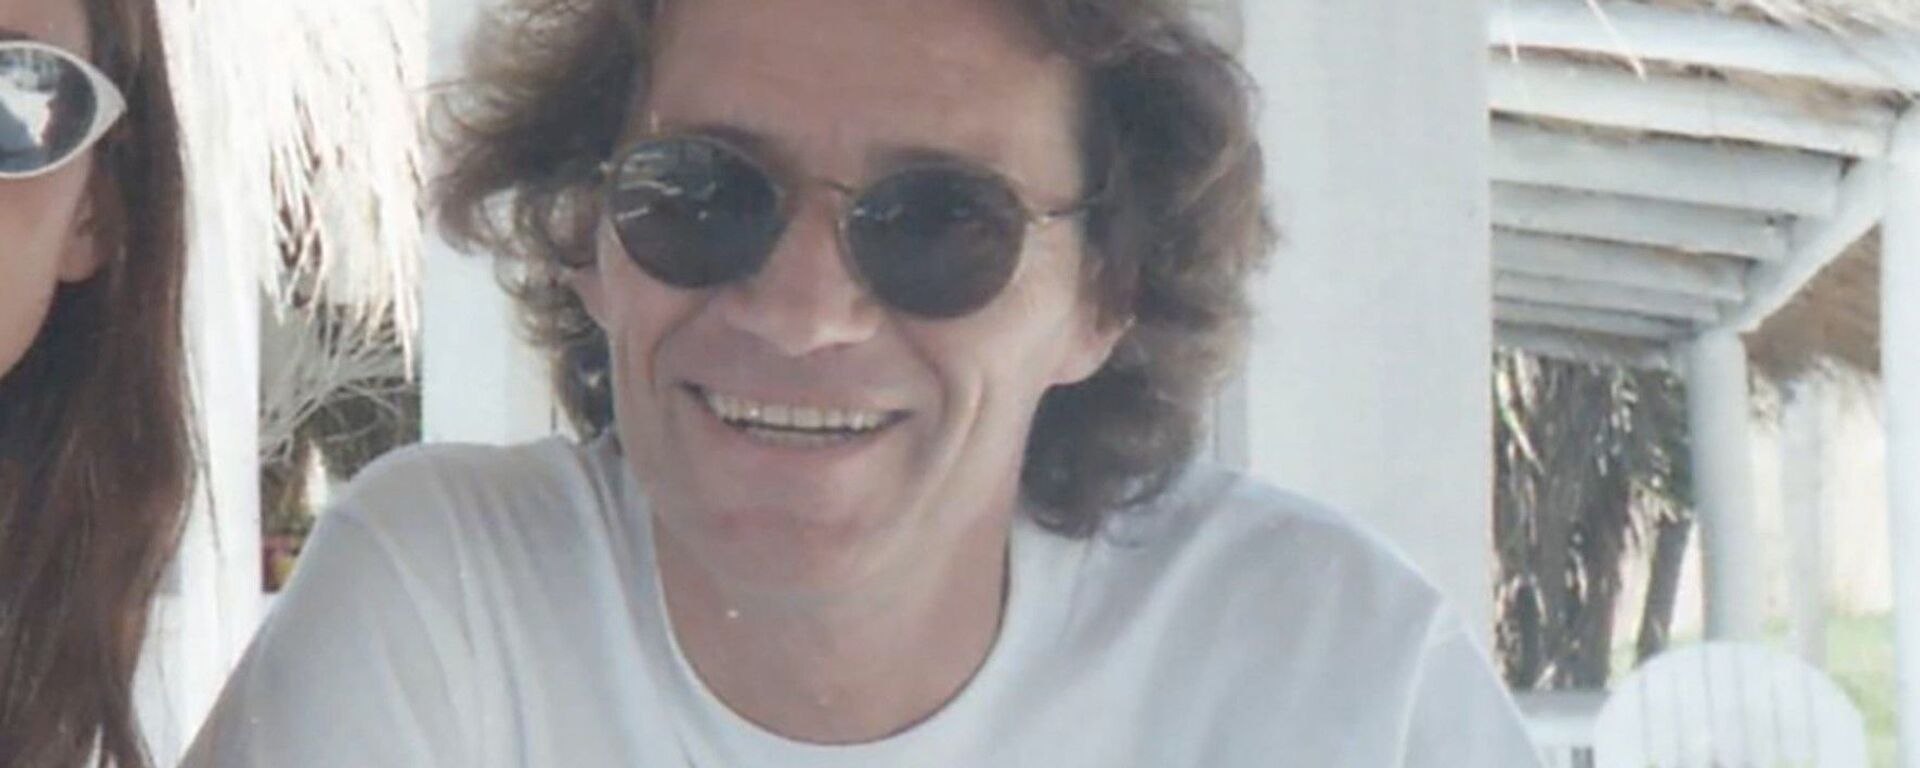 Screenshot shows an undated image of talent scout Jean-Luc Brunel who has been linked to the late American financier Jeffrey Epstein's sex trafficking ring. Brunel was taken into custody by French authorities on December 16, 2020, for questioning. - Sputnik International, 1920, 19.02.2022